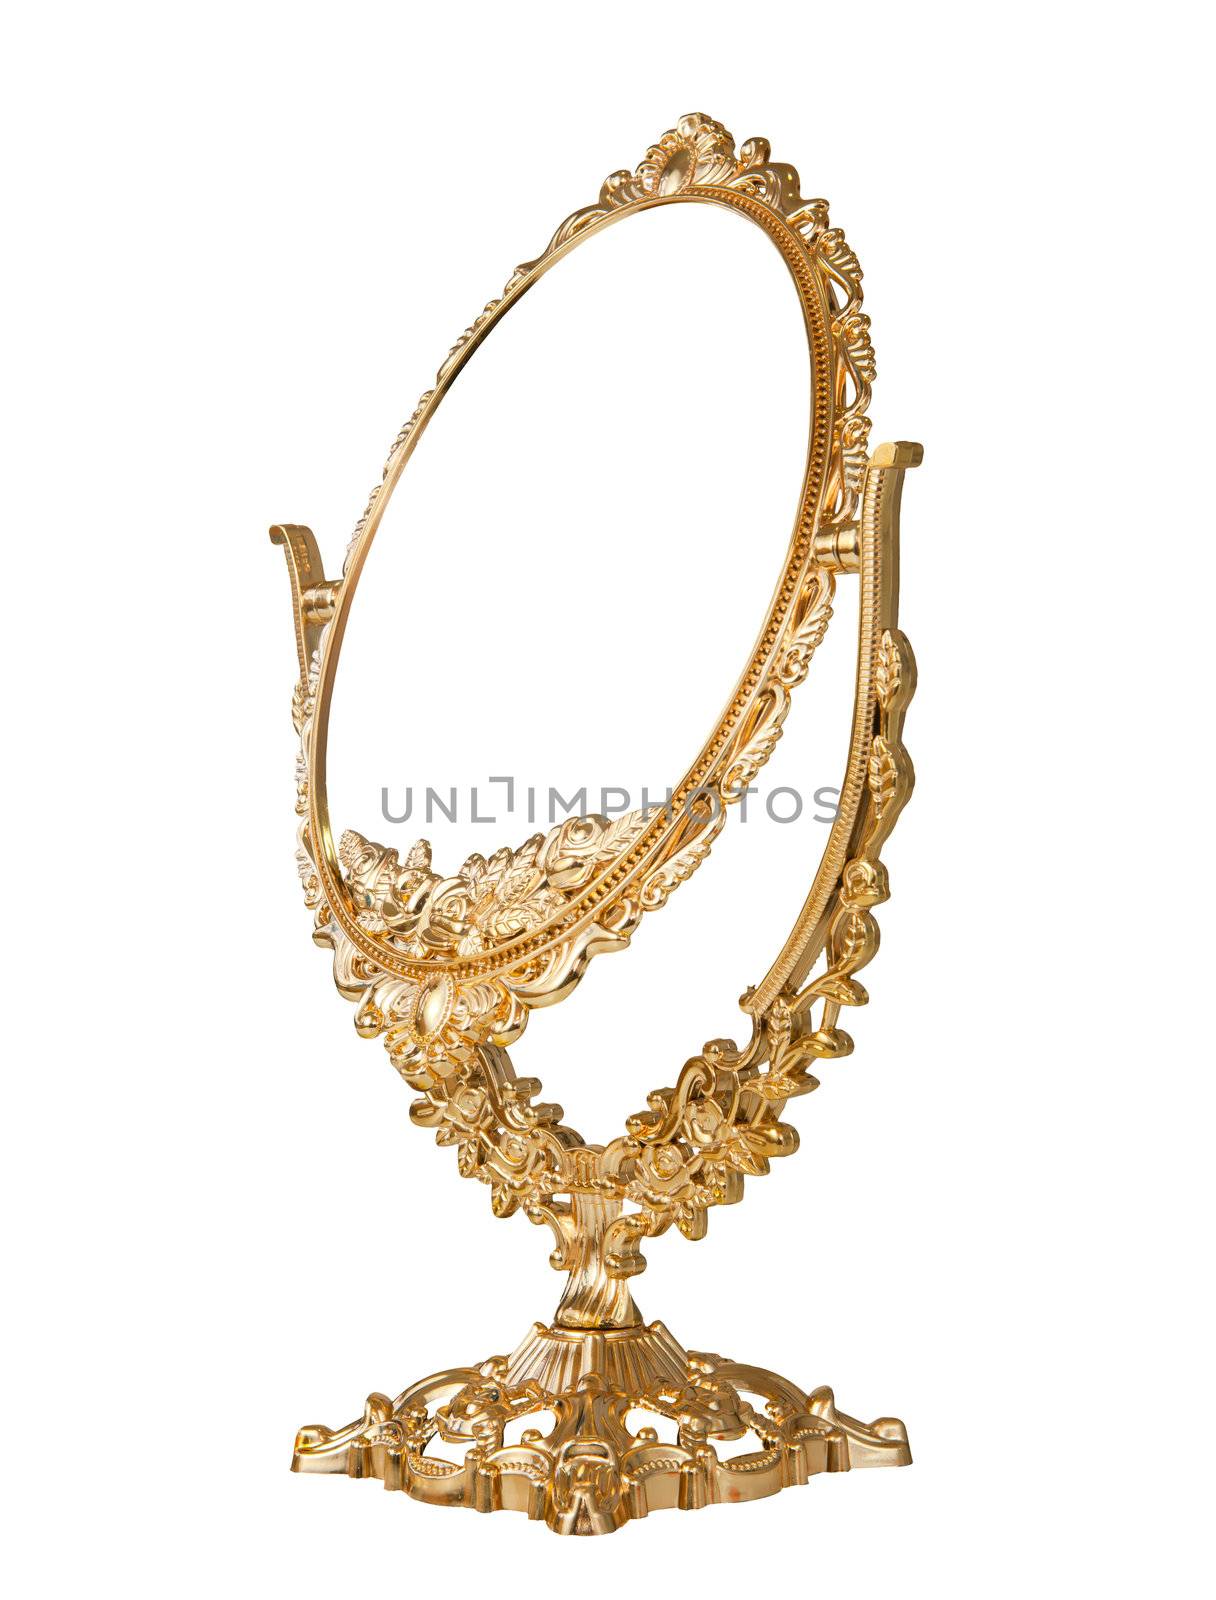 Antique baroque brass gold frame and mirror isolated on white background